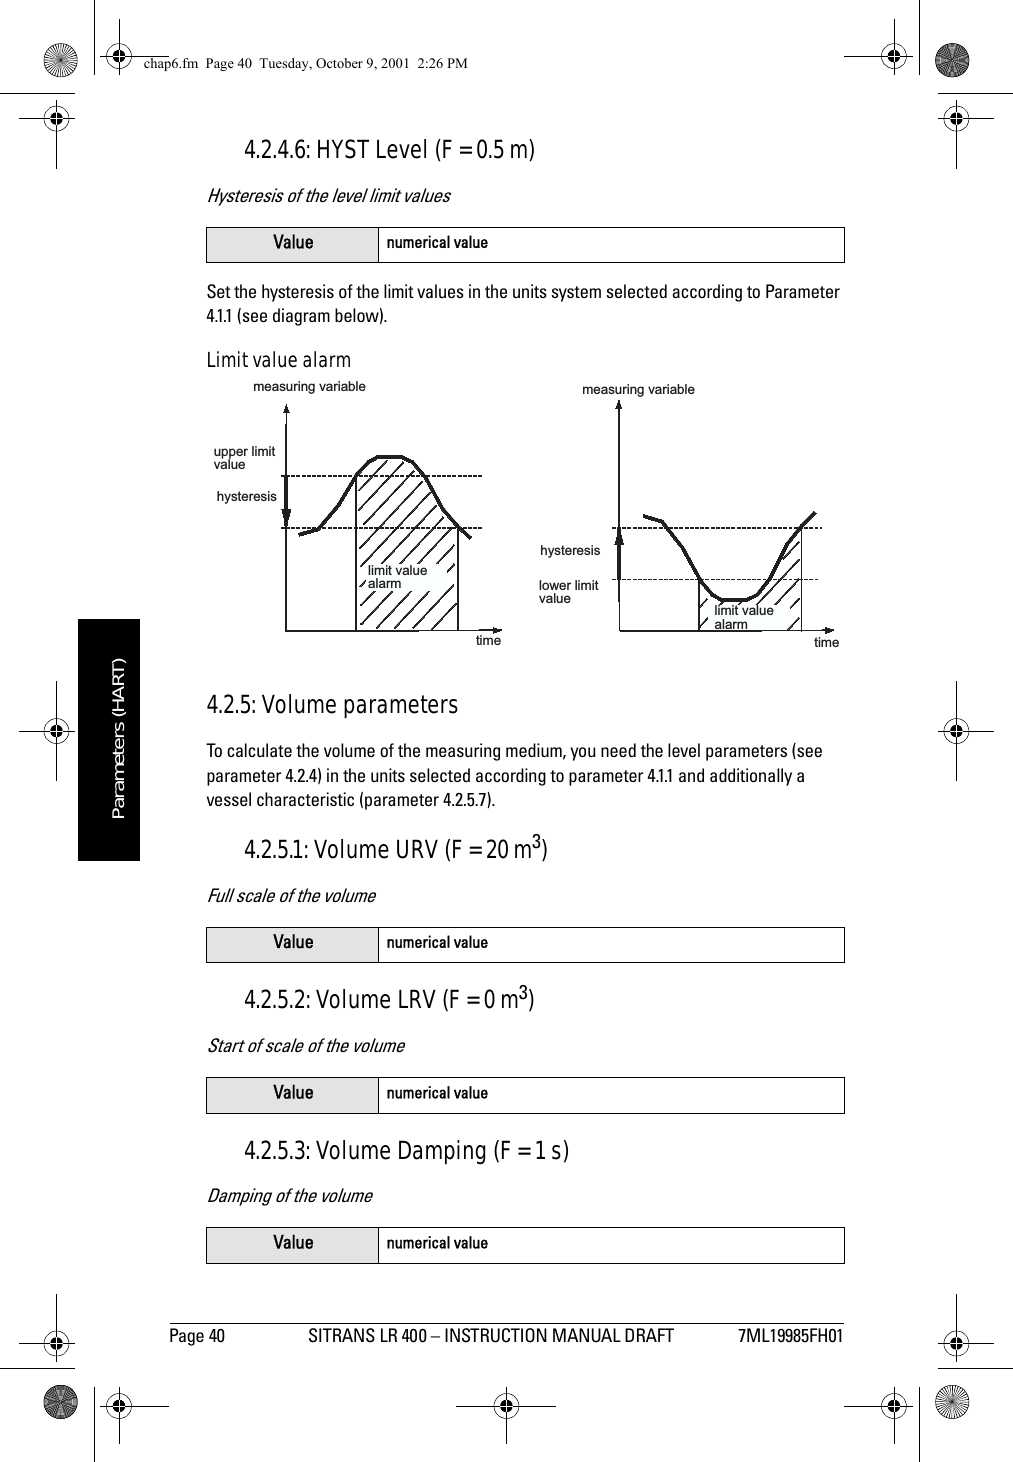 Page 40 SITRANS LR 400 – INSTRUCTION MANUAL DRAFT 7ML19985FH01mmmmmParameters (HART)4.2.4.6: HYST Level (F = 0.5 m)Hysteresis of the level limit valuesSet the hysteresis of the limit values in the units system selected according to Parameter 4.1.1 (see diagram below).Limit value alarm4.2.5: Volume parametersTo calculate the volume of the measuring medium, you need the level parameters (see parameter 4.2.4) in the units selected according to parameter 4.1.1 and additionally a vessel characteristic (parameter 4.2.5.7).4.2.5.1: Volume URV (F = 20 m3)Full scale of the volume4.2.5.2: Volume LRV (F = 0 m3)Start of scale of the volume4.2.5.3: Volume Damping (F = 1 s)Damping of the volumeValue numerical valueValue numerical valueValue numerical valueValue numerical valuemeasuring variableupper limitvaluetimehysteresismeasuring variablelower limitvaluetimehysteresislimit valuealarmlimit valuealarmchap6.fm  Page 40  Tuesday, October 9, 2001  2:26 PM